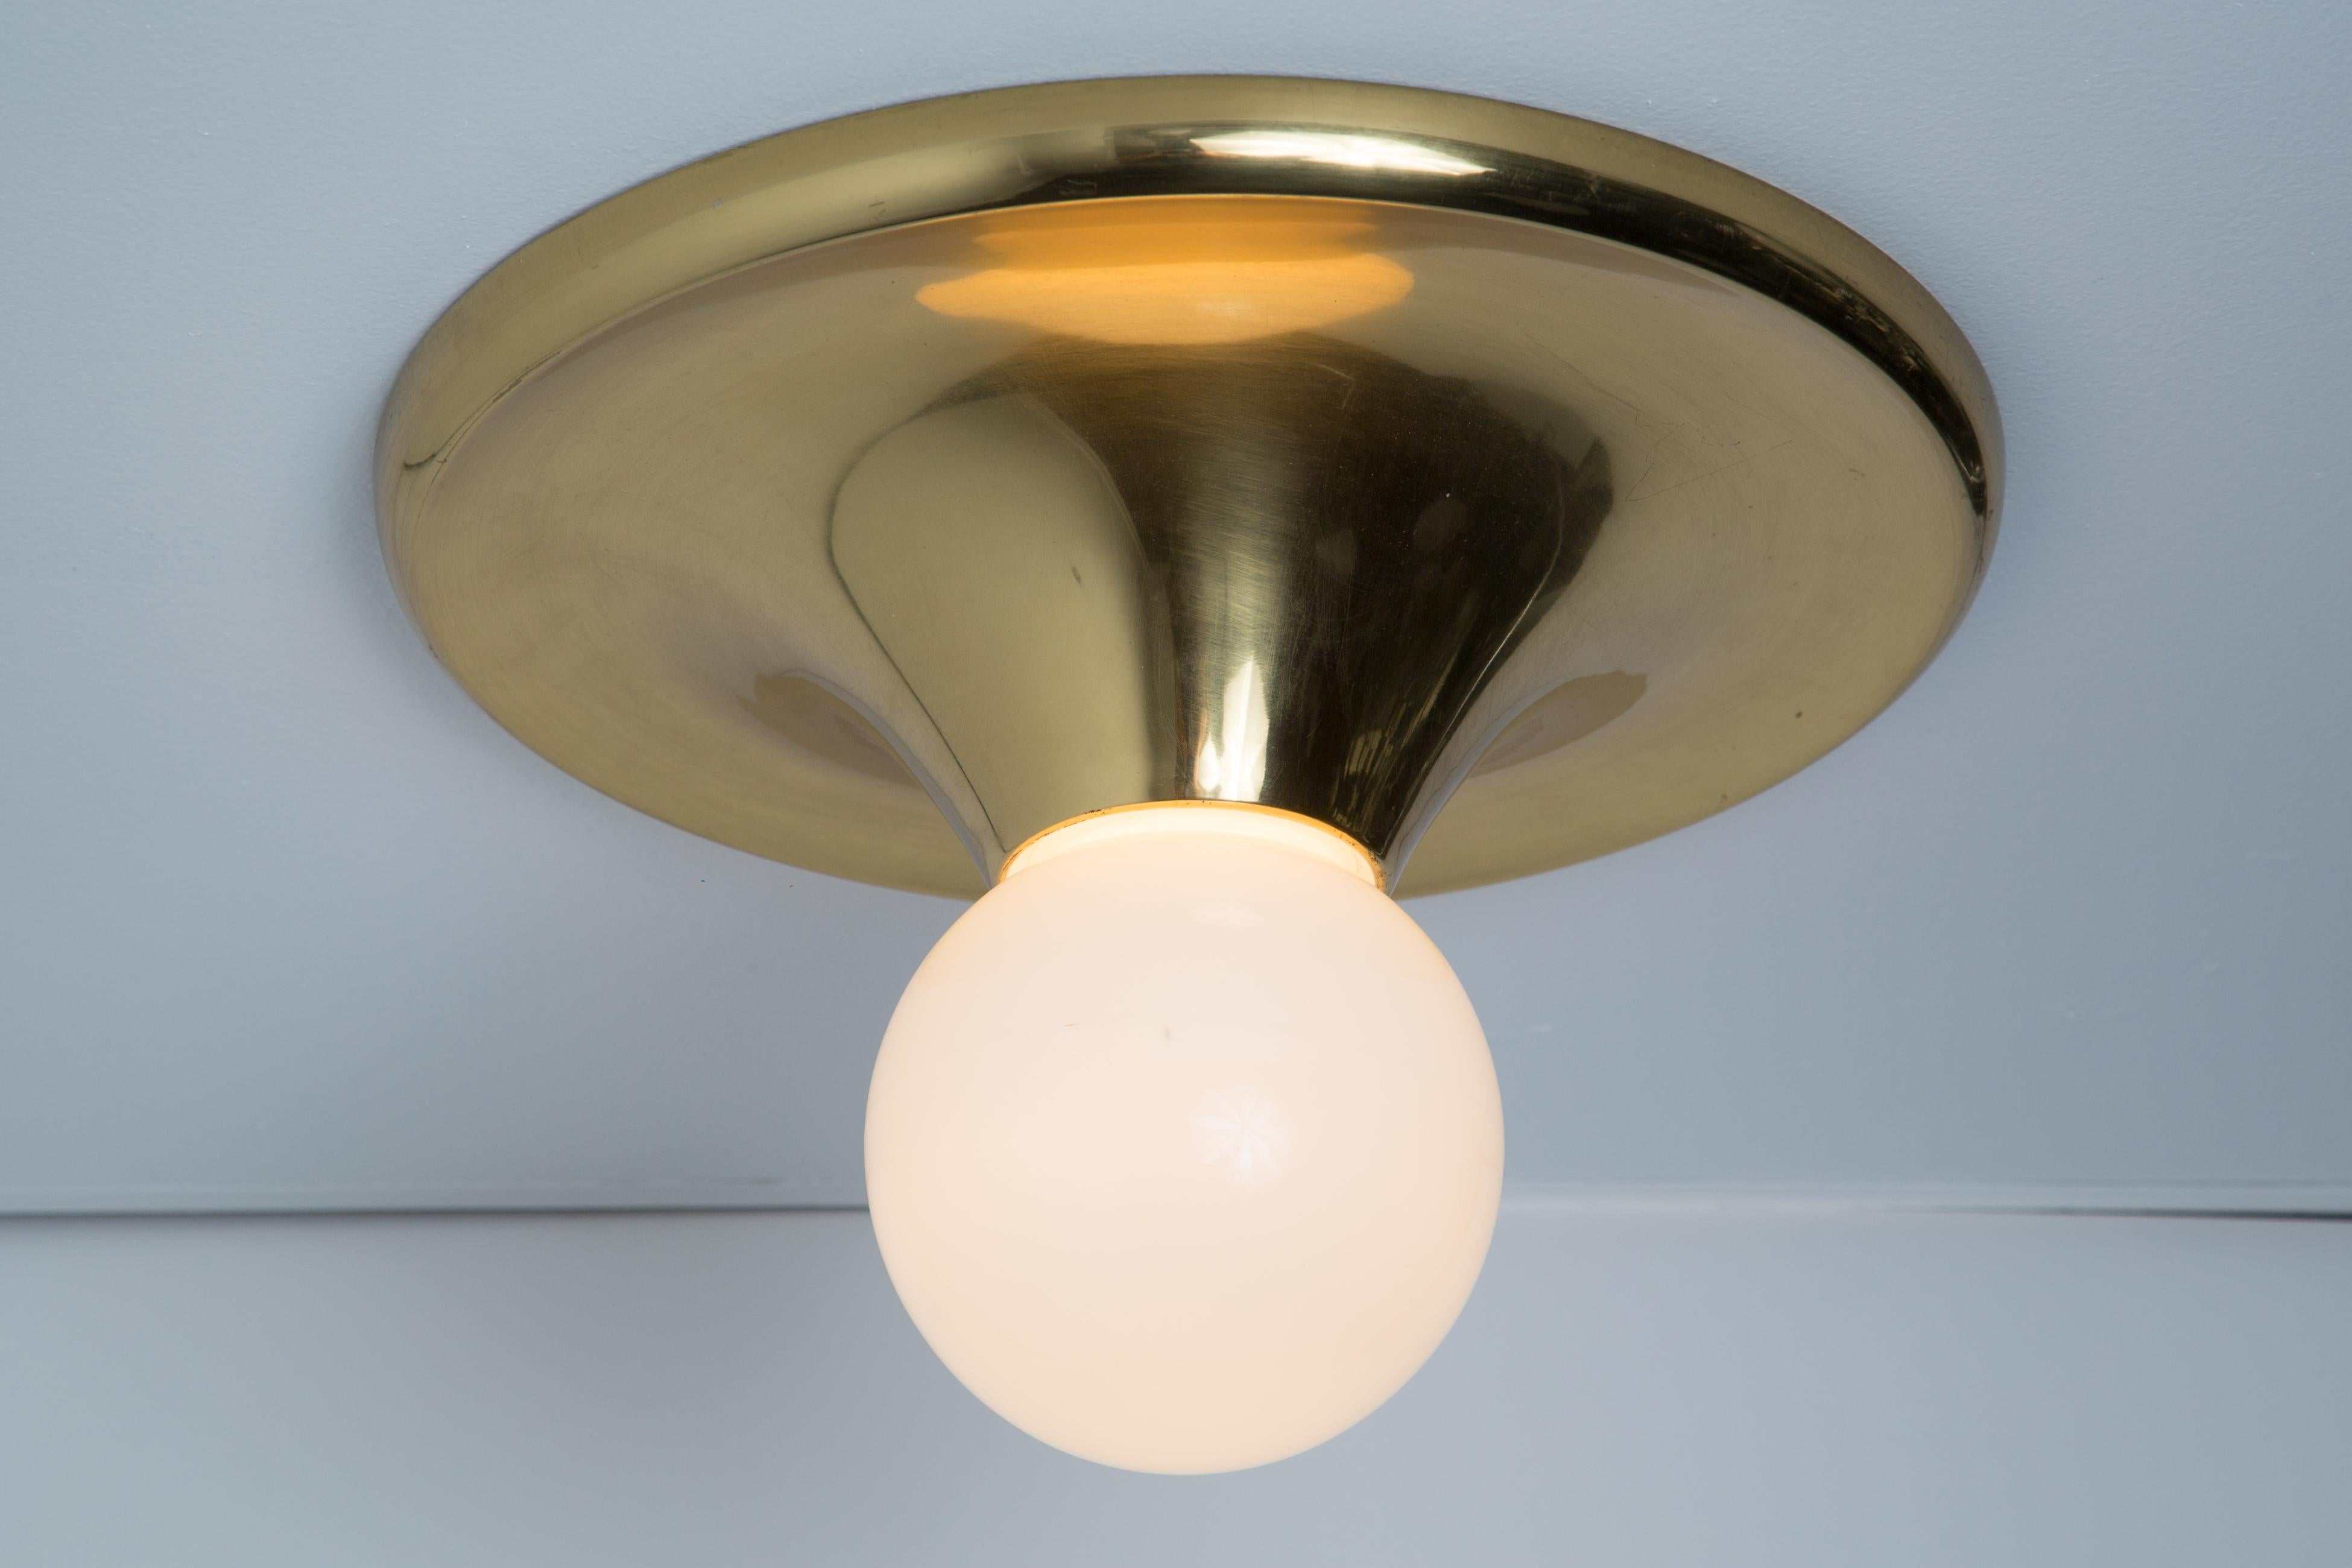 Large 1960s Achille Castiglioni & Pier Giacomo 'Light Ball' Wall or Ceiling Lamp for Flos. Designed in 1965, this rare and vintage brass variant comes with satin opaque glass. An incredibly refined and iconic midcentury design that is